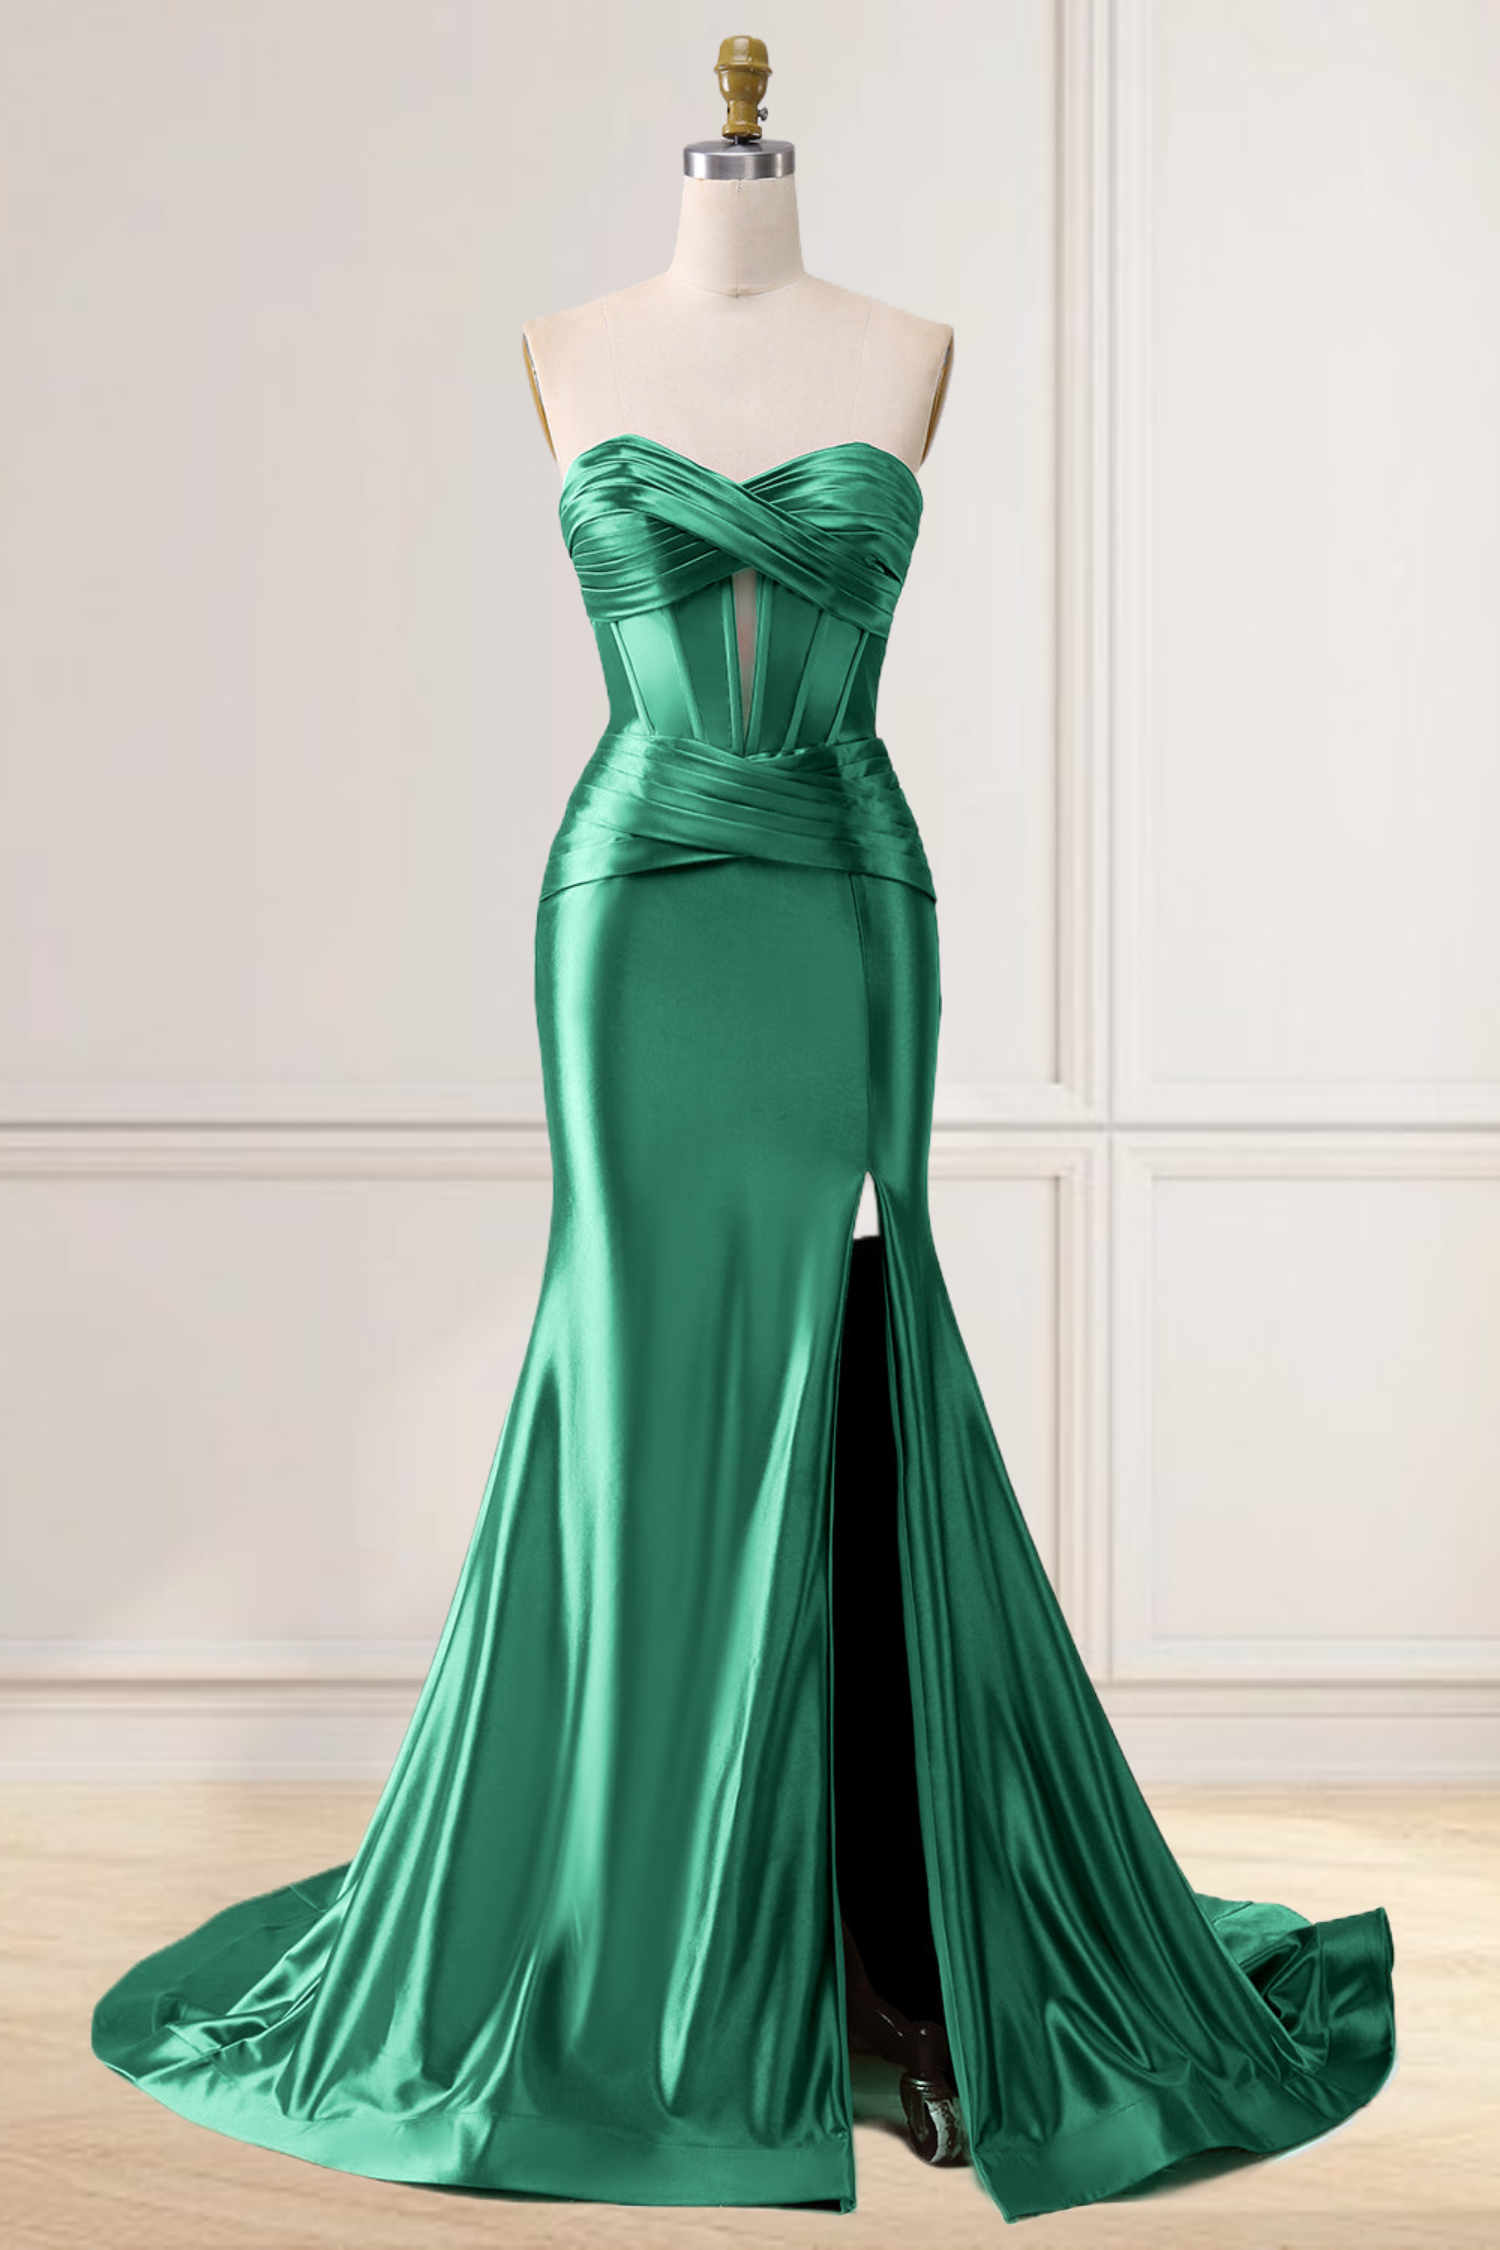 Dressime Mermaid Satin Sweetheart Cut Out Long Prom Dress with Slit